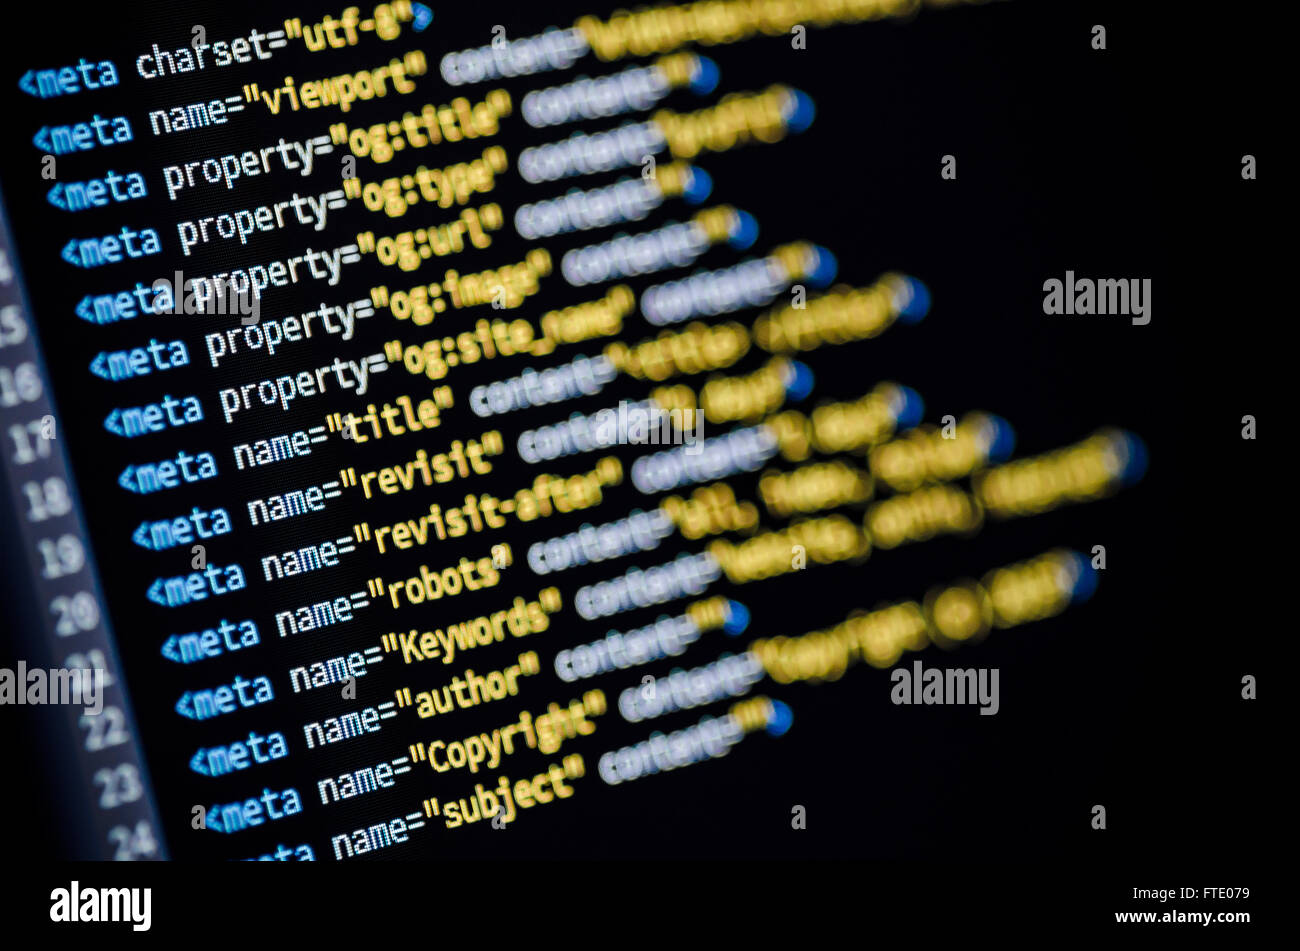 Close-up of a meta tag code displayed on a computer monitor Stock Photo